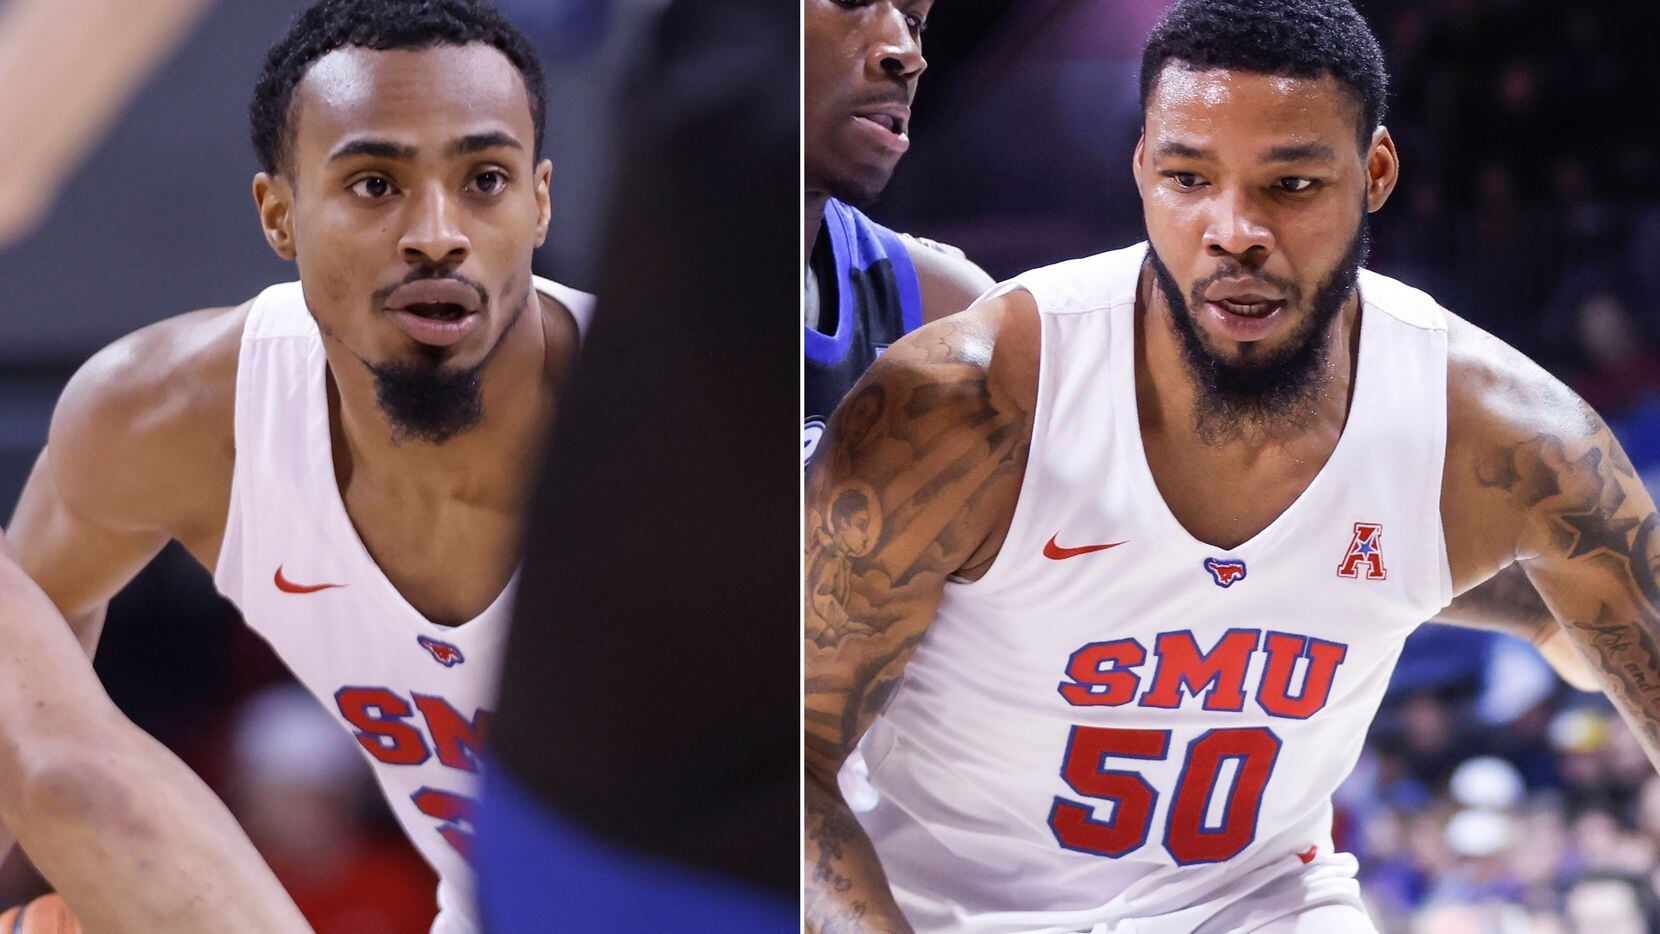 SMU basketball's Michael (left) and Marcus (right) Weathers can be seen in this photo...